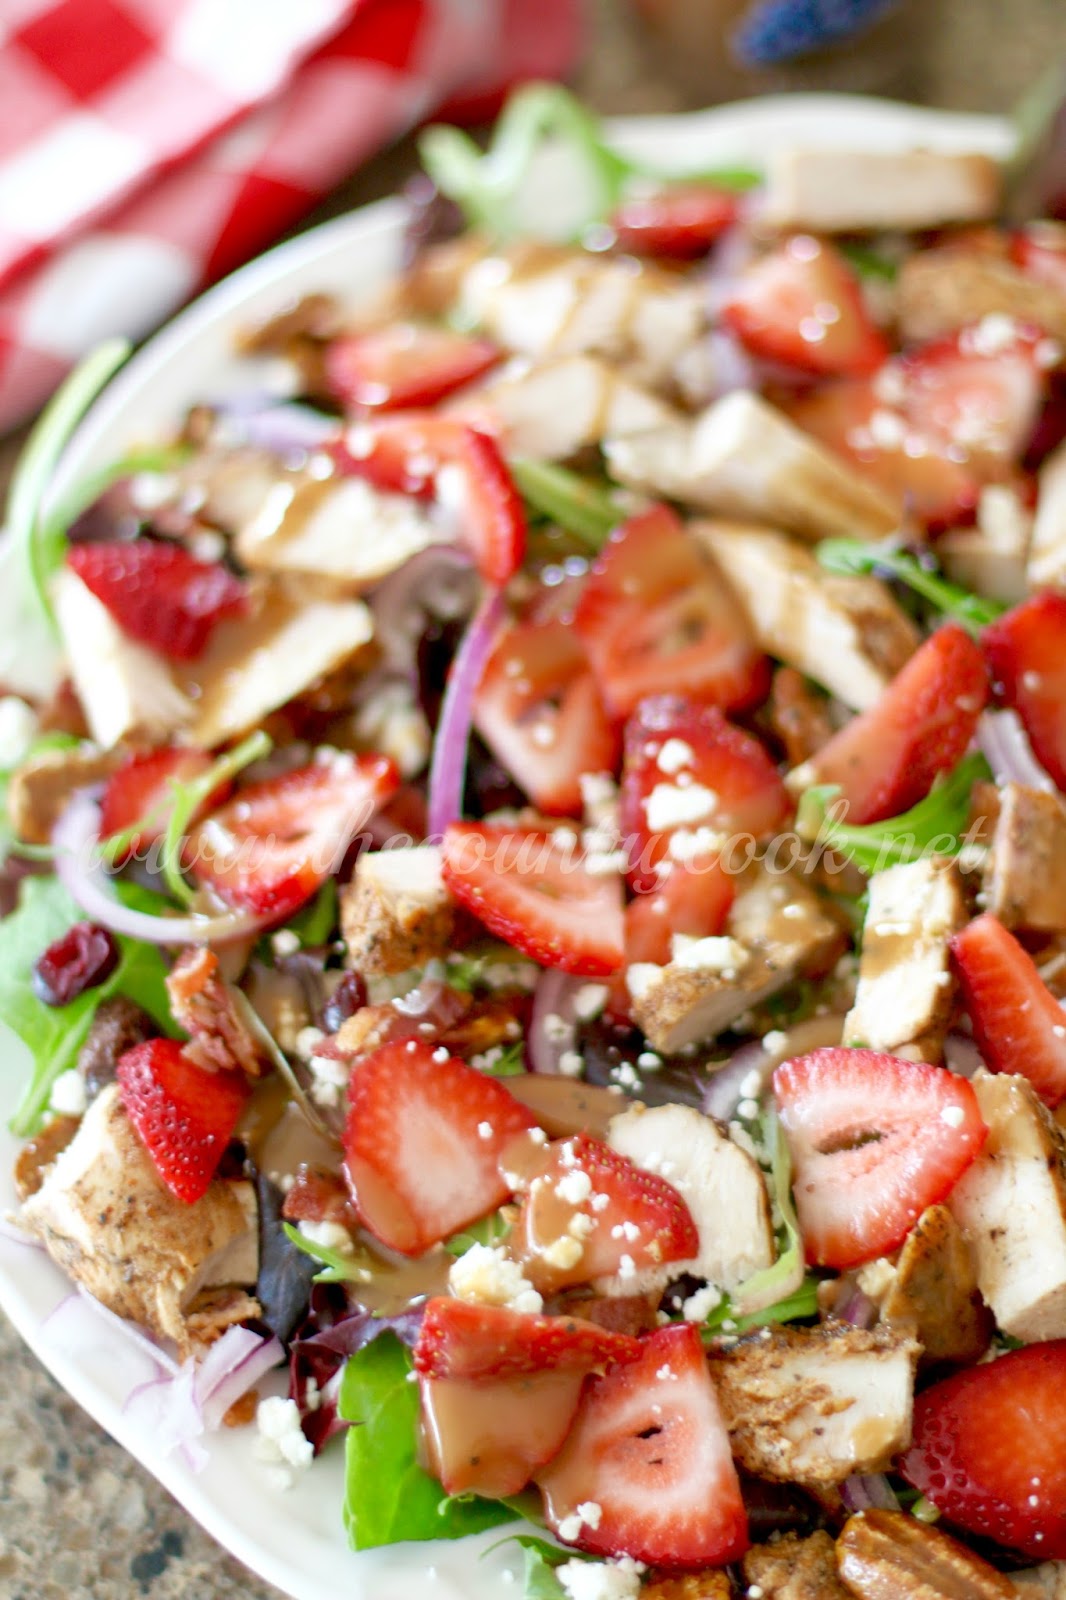 Strawberry Fields Salad - The Country Cook